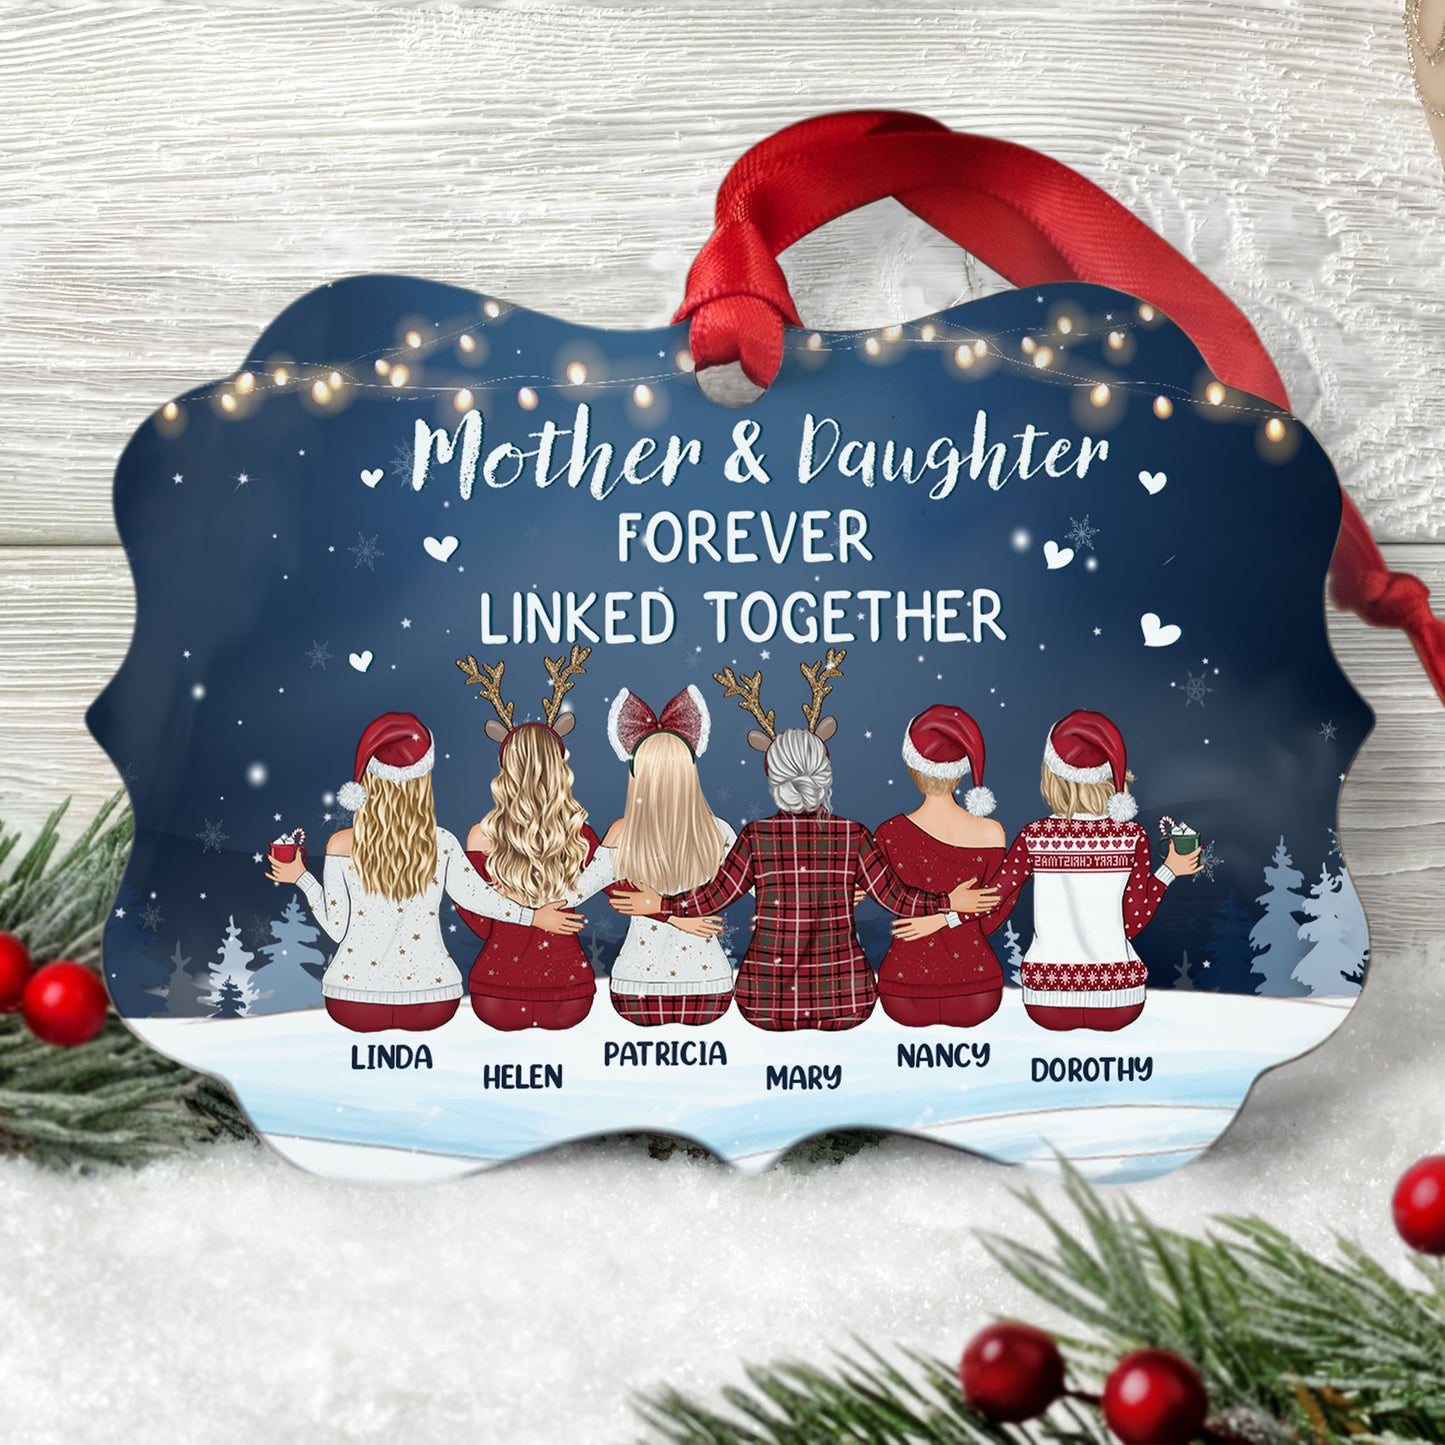 The Love Between A Mother And Daughter Is Forever - Personalized Aluminum Ornament - Christmas Gift For Mom